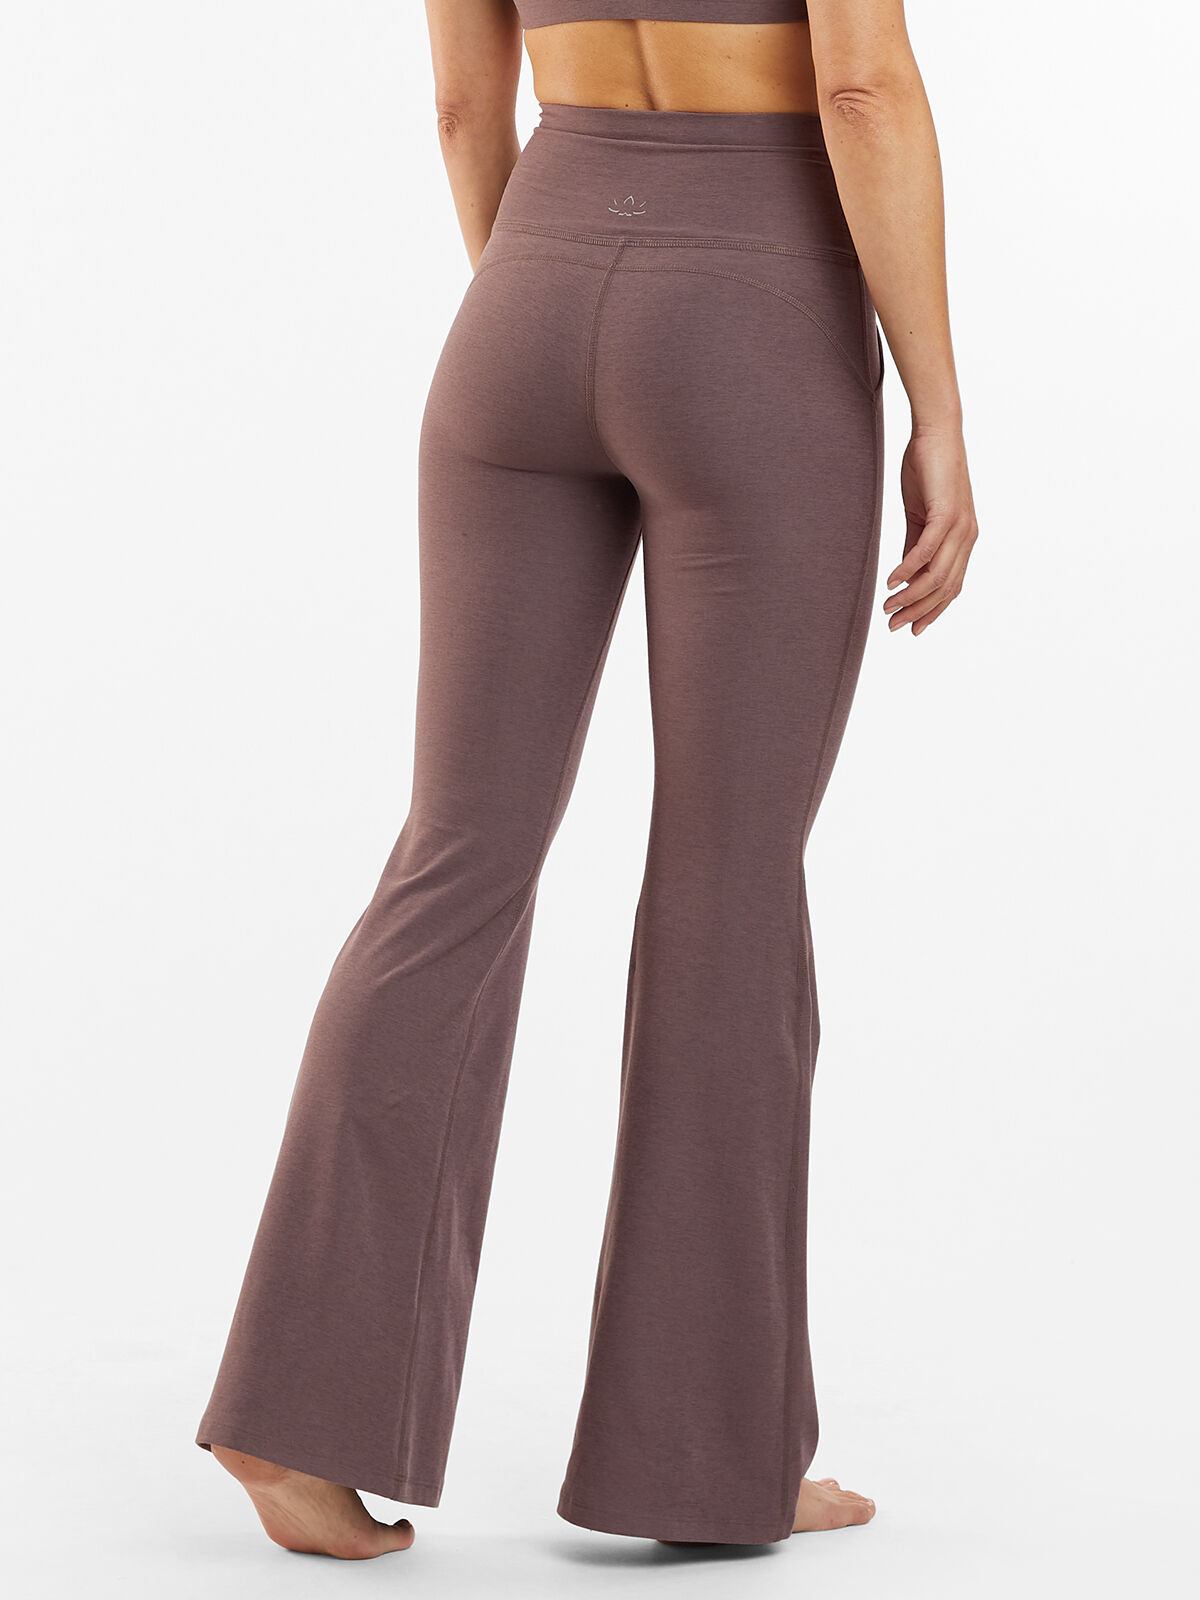 13 of the Best Flared Leggings and Yoga Pants  WellGood